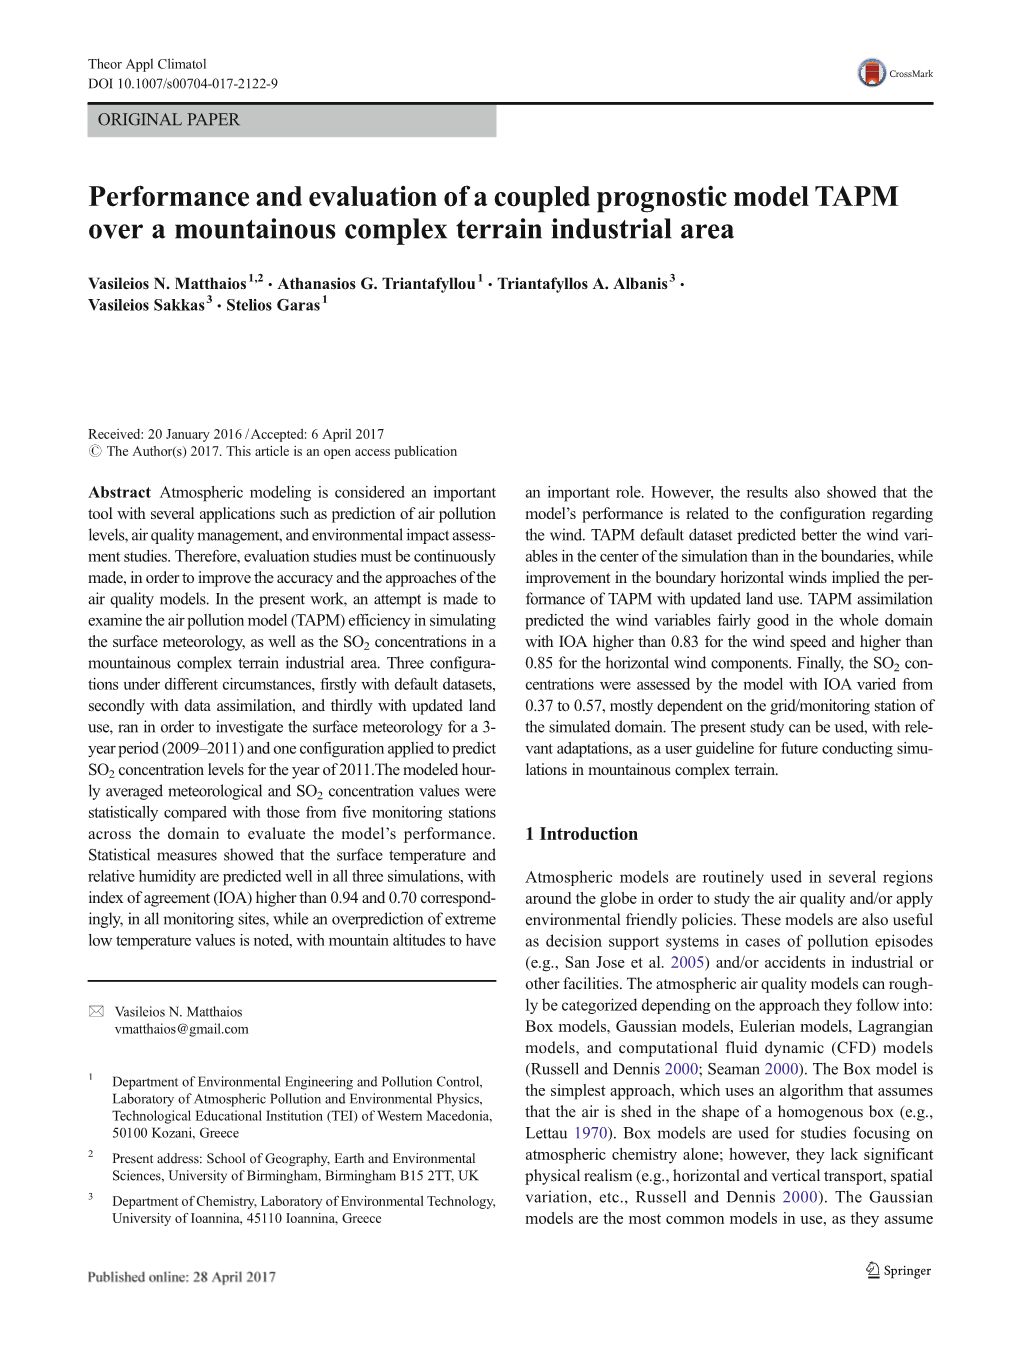 Performance and Evaluation of a Coupled Prognostic Model TAPM Over a Mountainous Complex Terrain Industrial Area